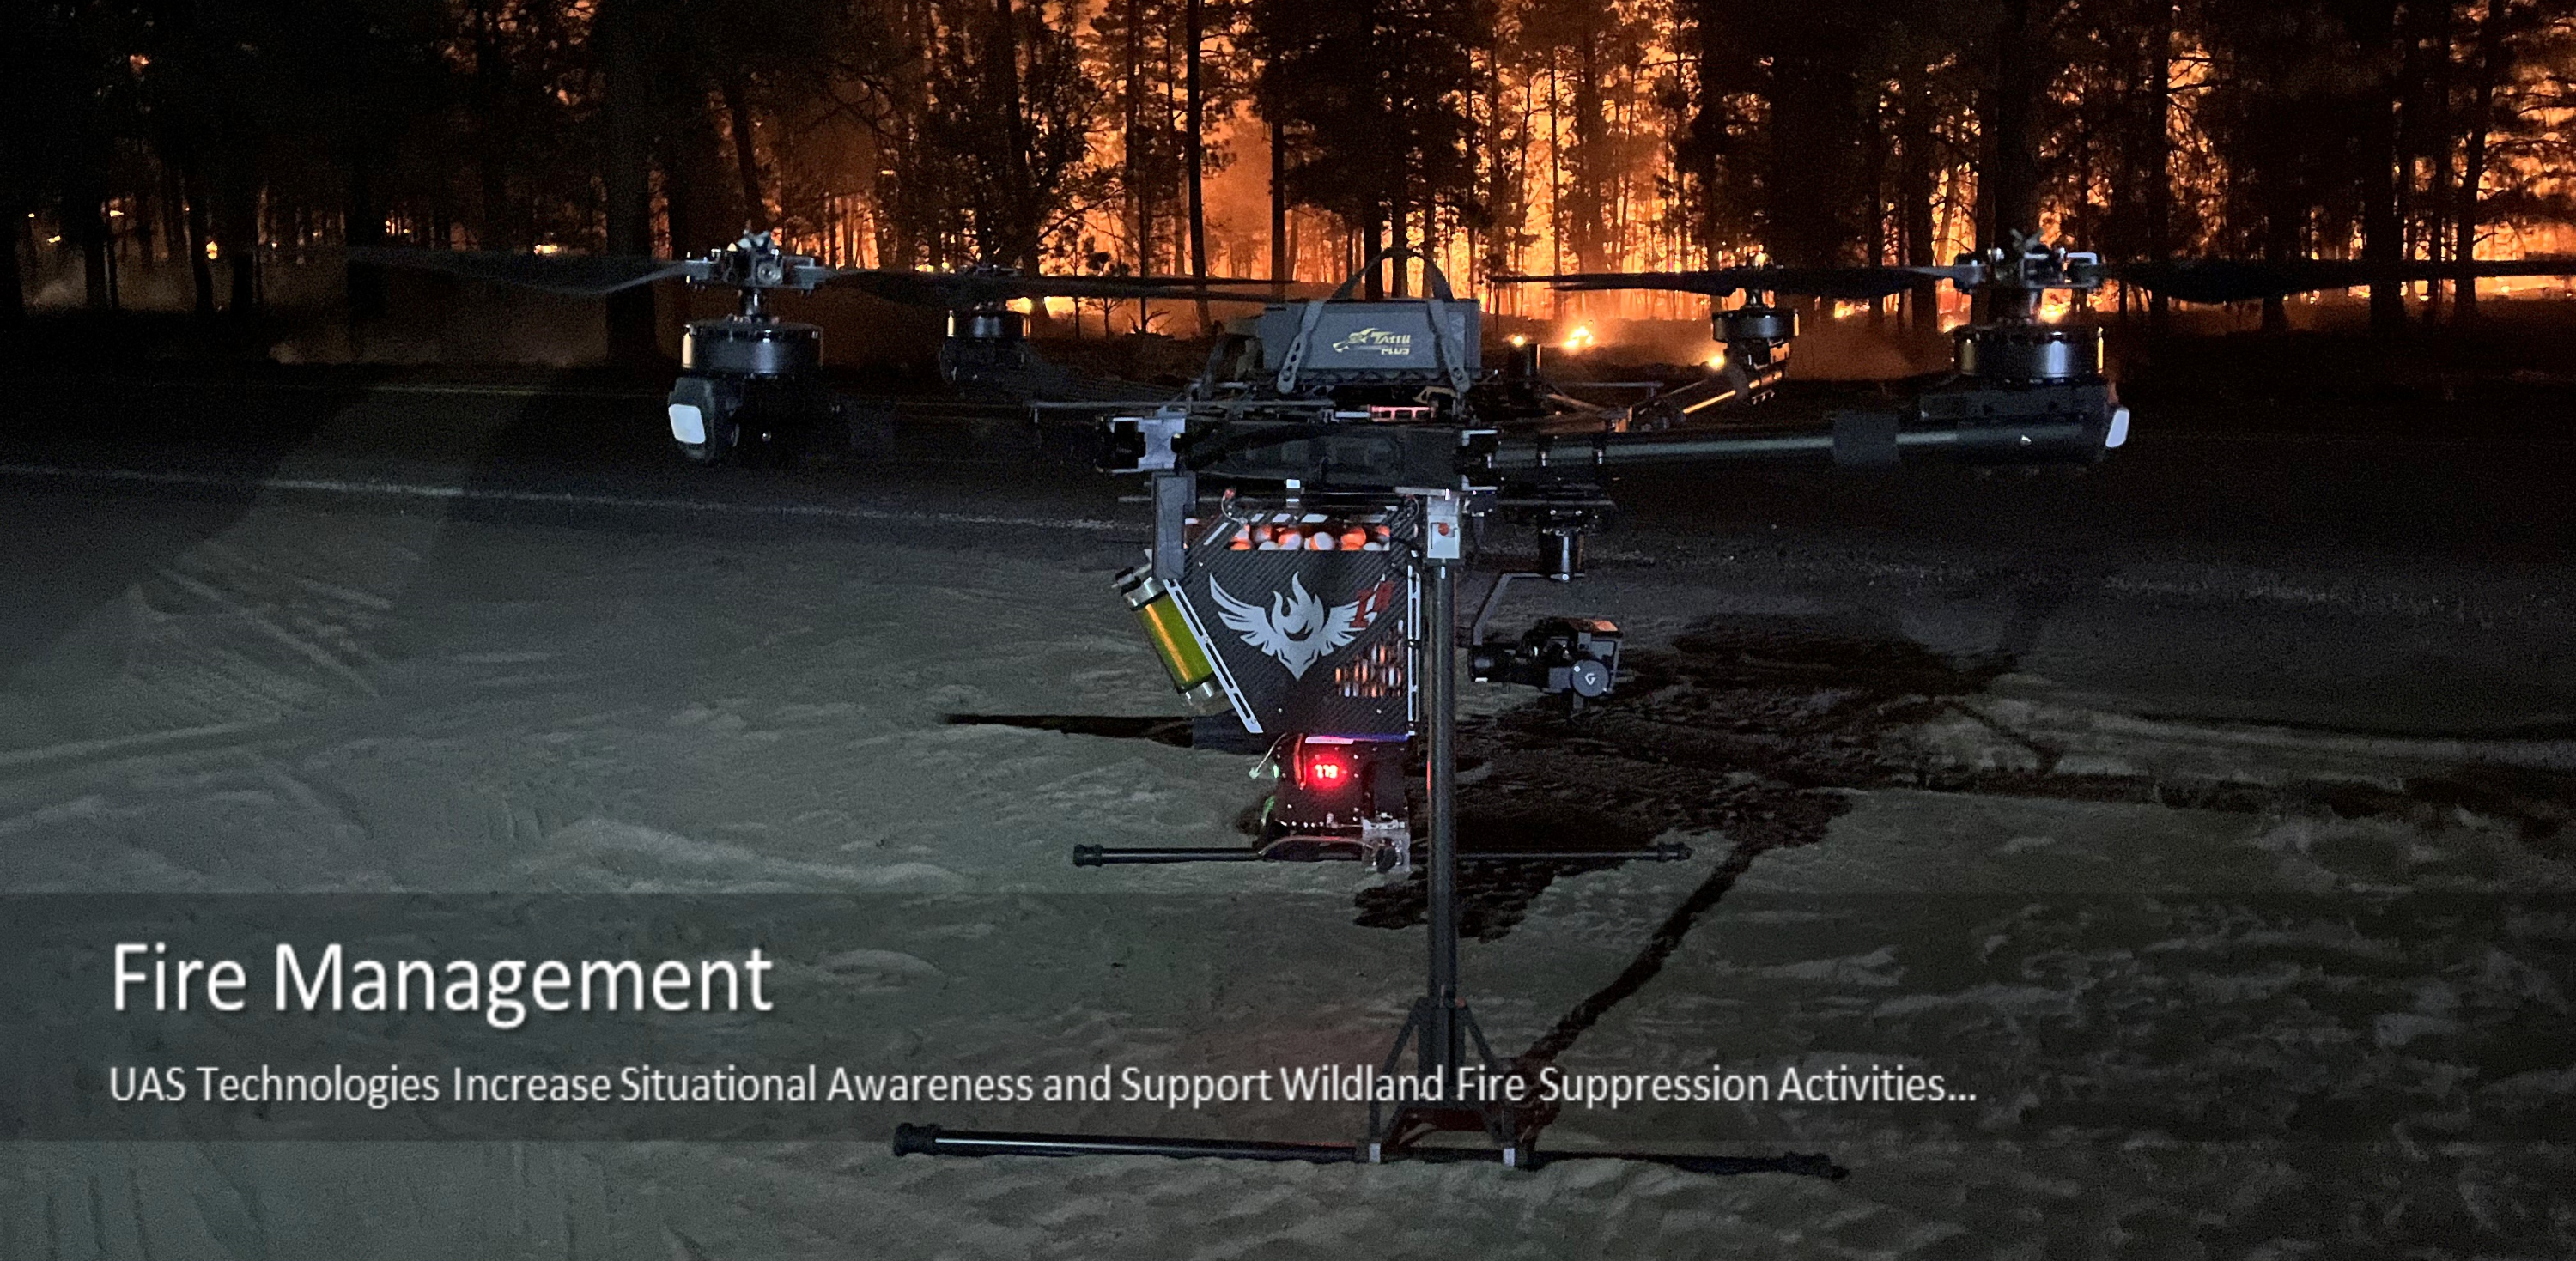 An Aerial Unmanned System or Drone on a dirt road at night with trees burning in the background.